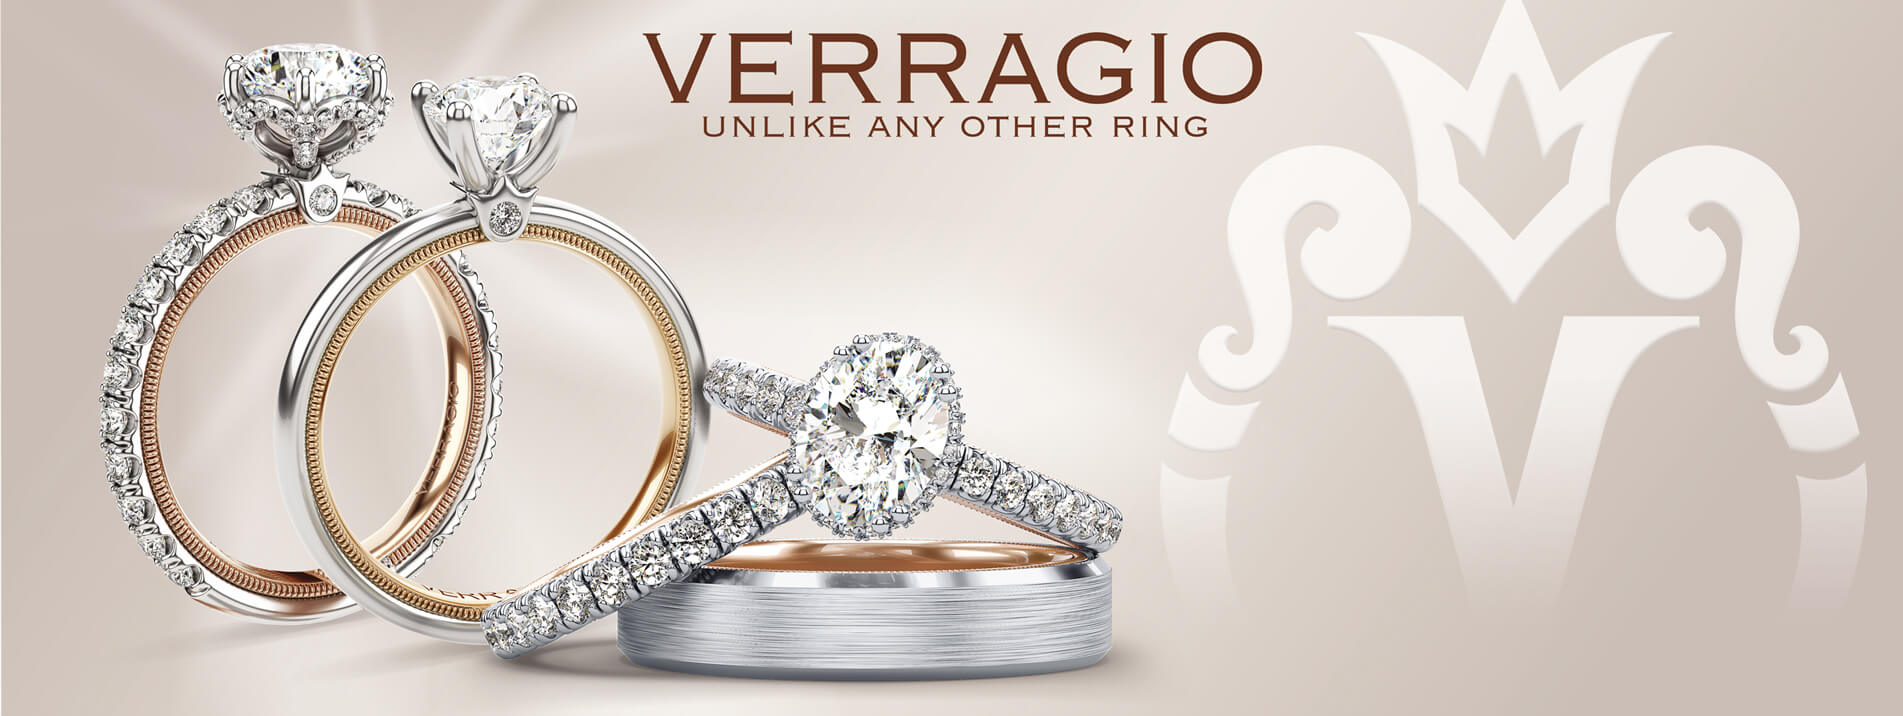 Verragio Diamond Bridal Wedding Ring Langley Guildford Mall Town Center Vancouver